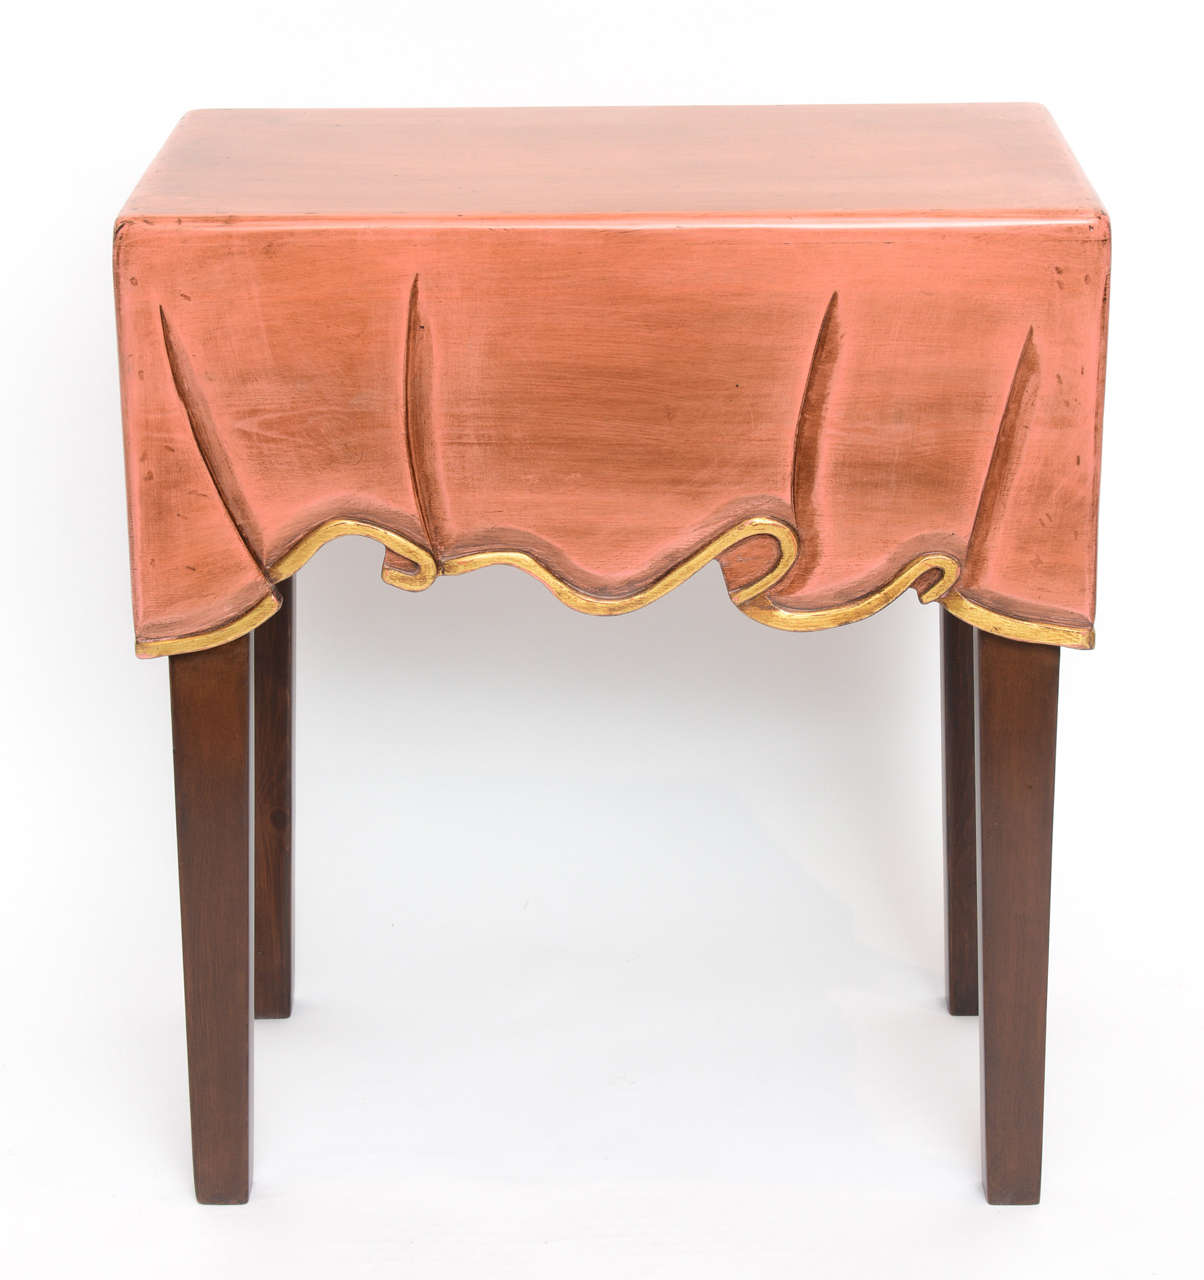 All carved from one piece of wood in antiqued pink and brown tones with soft gold leaf details.